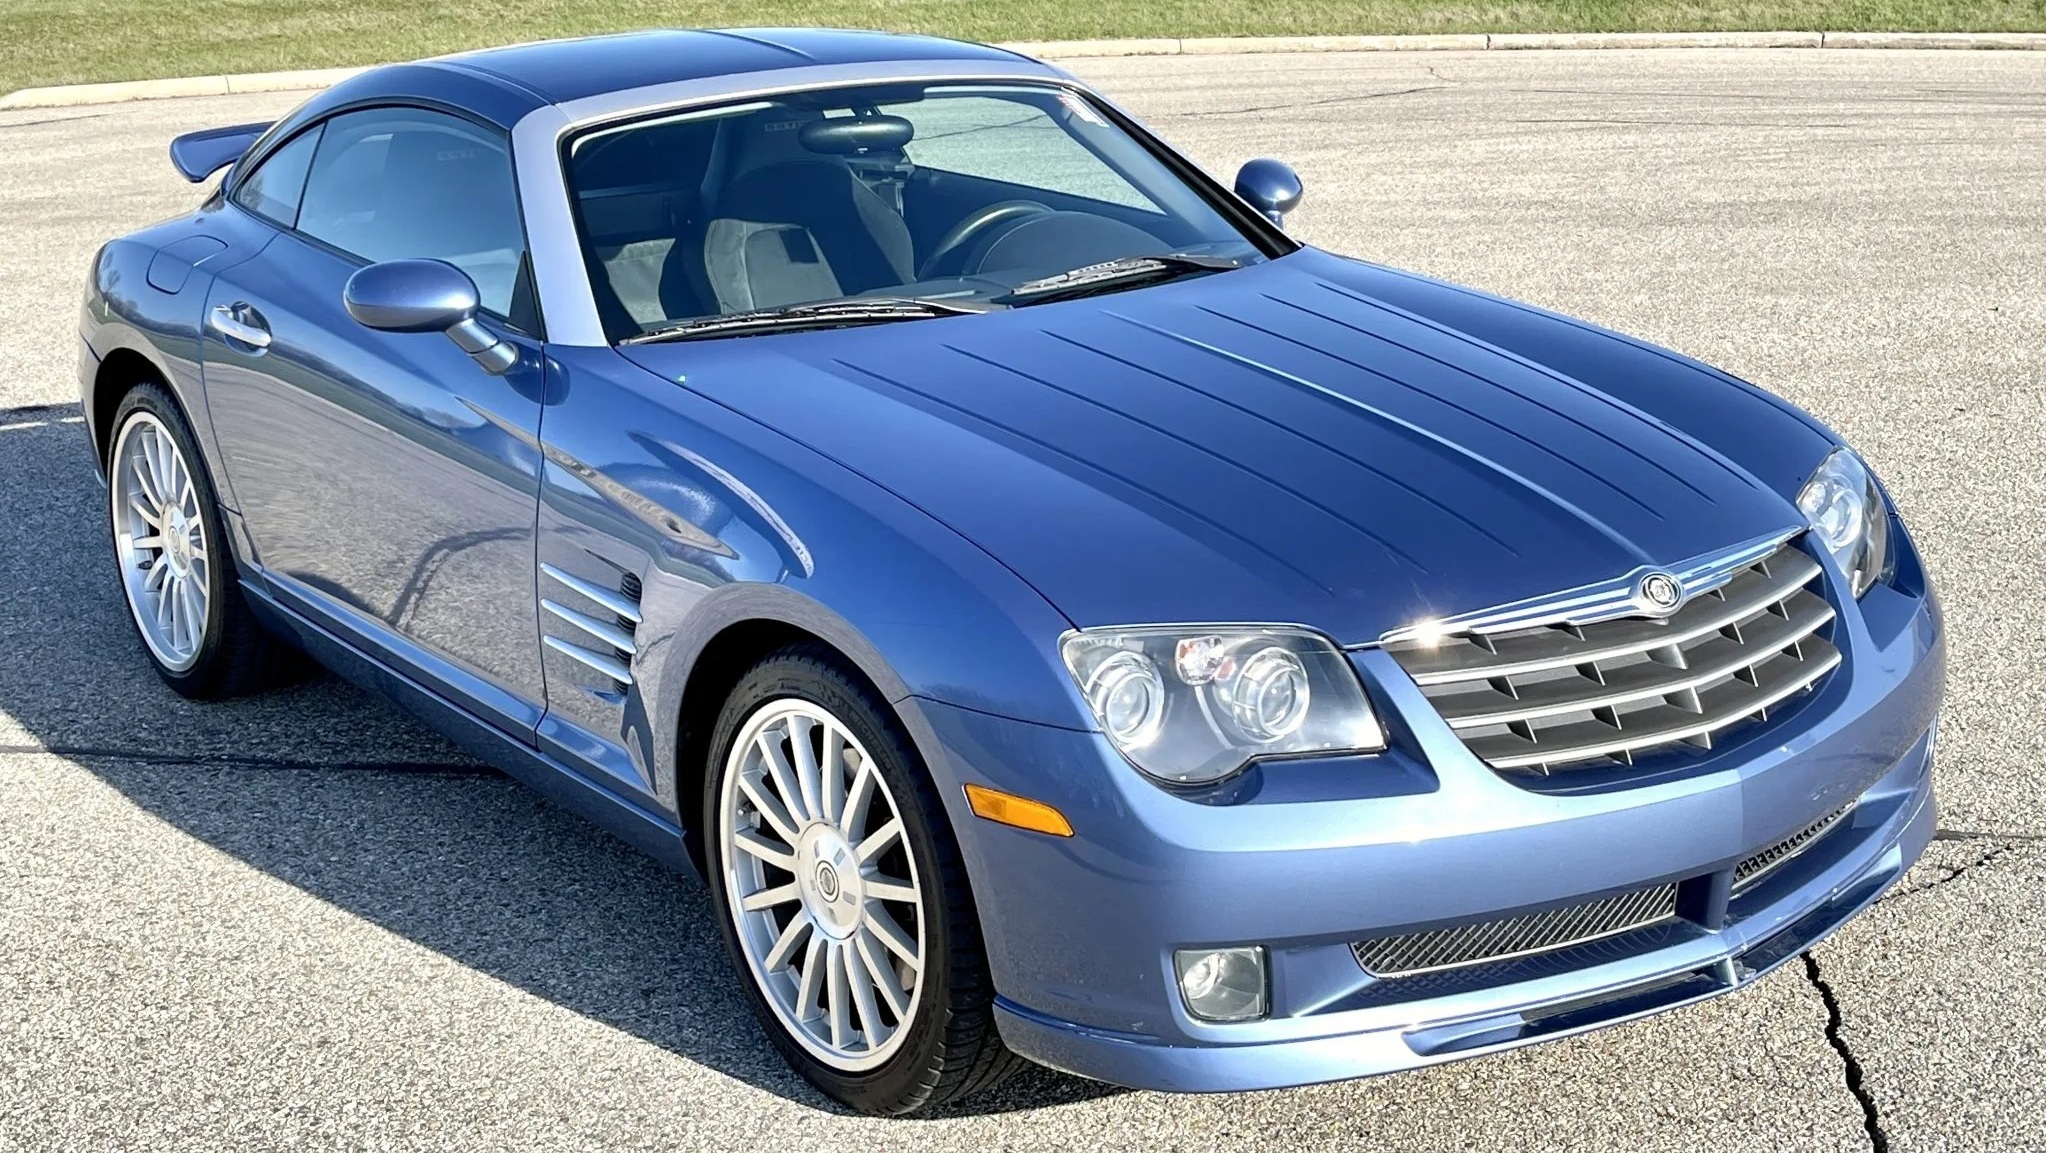 AUCTION: The Supercharged Chrysler Crossfire SRT6 Coupe! - MoparInsiders